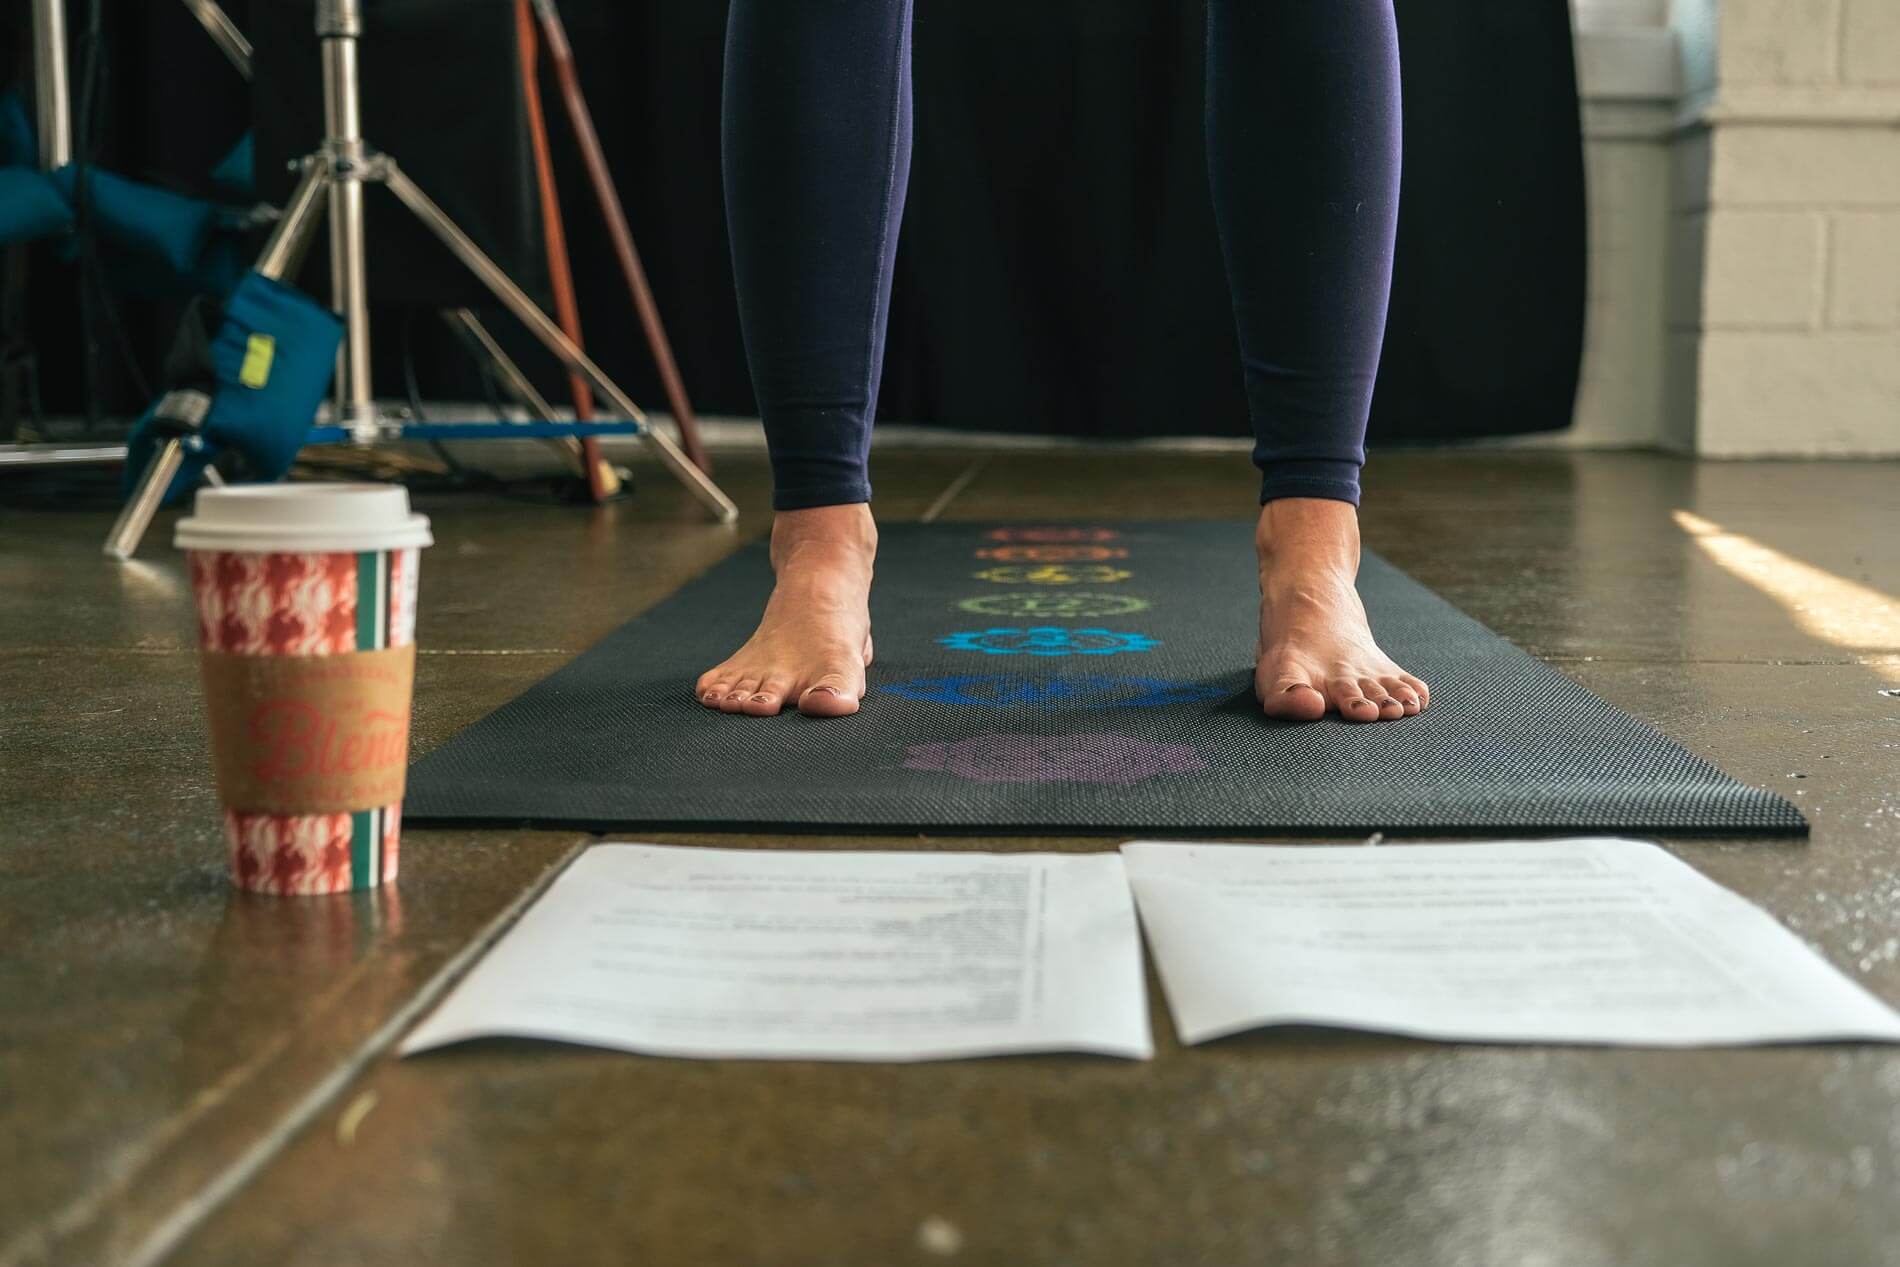 yoga class notes help ease fear of public speaking